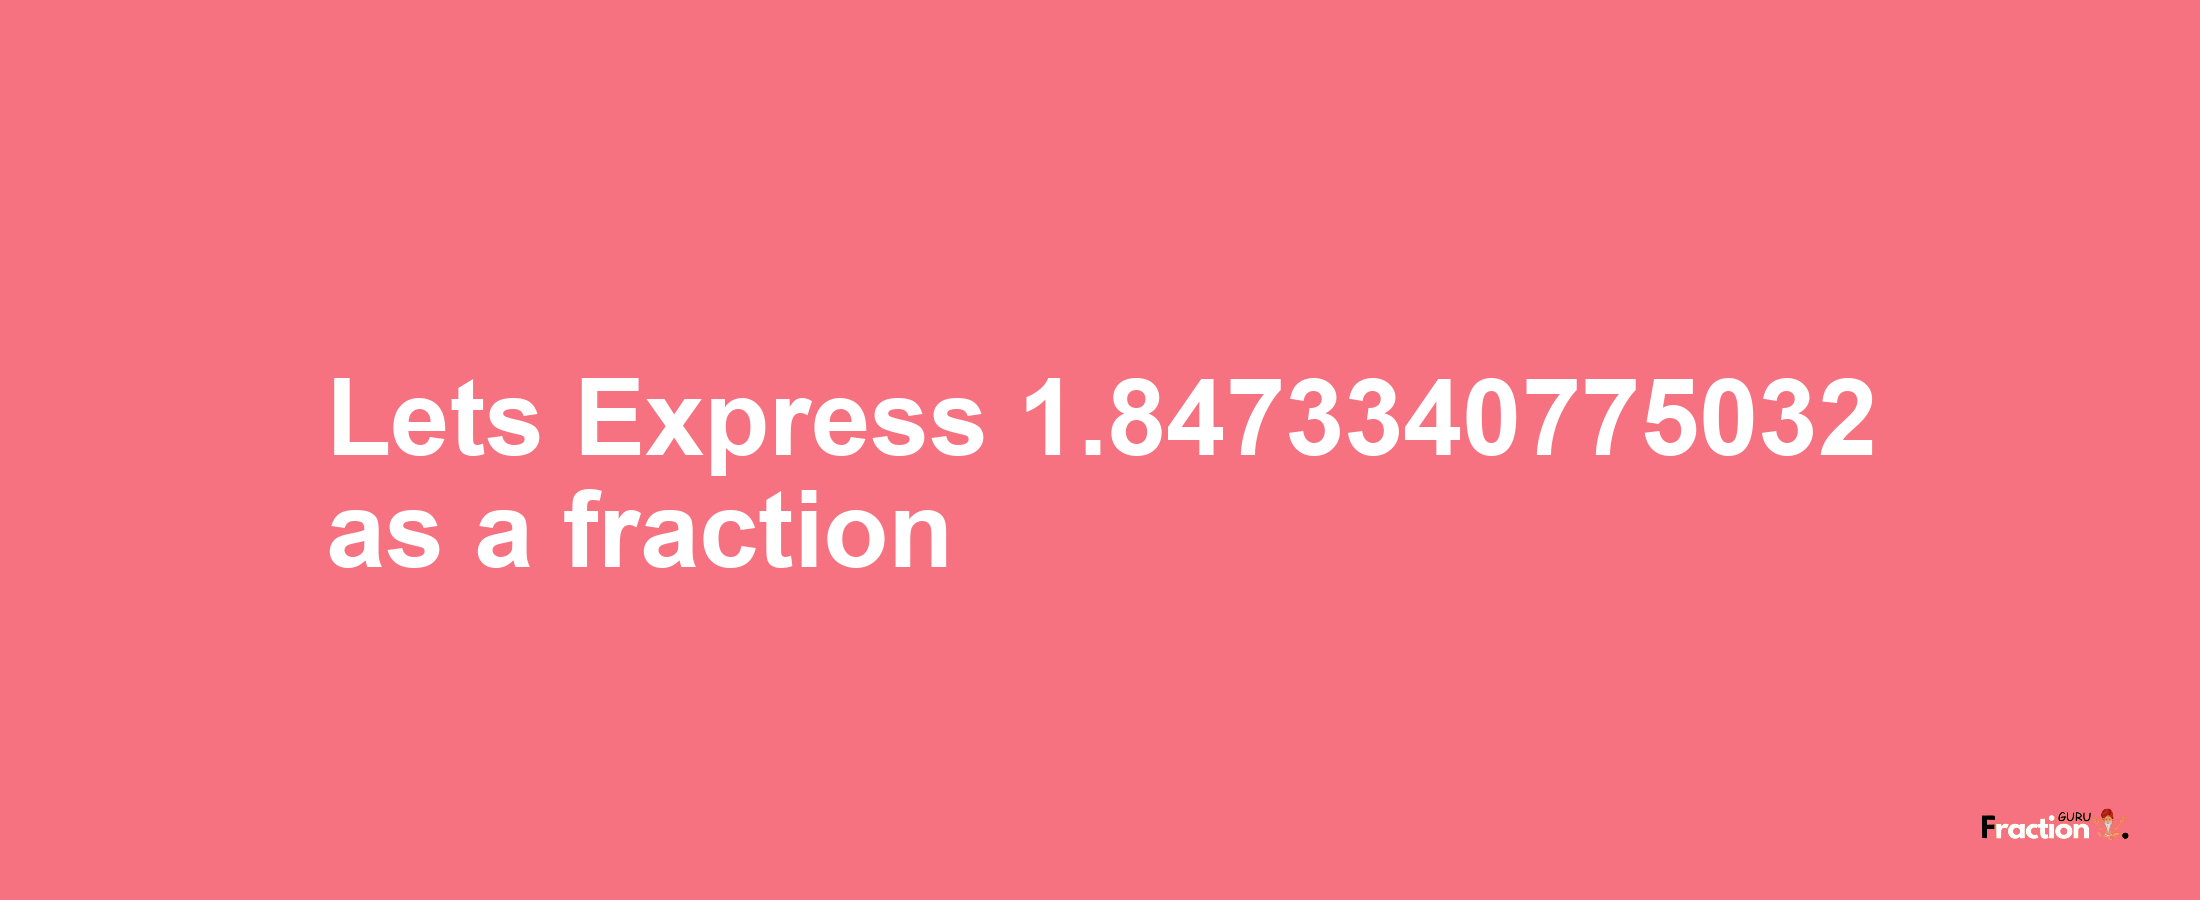 Lets Express 1.8473340775032 as afraction